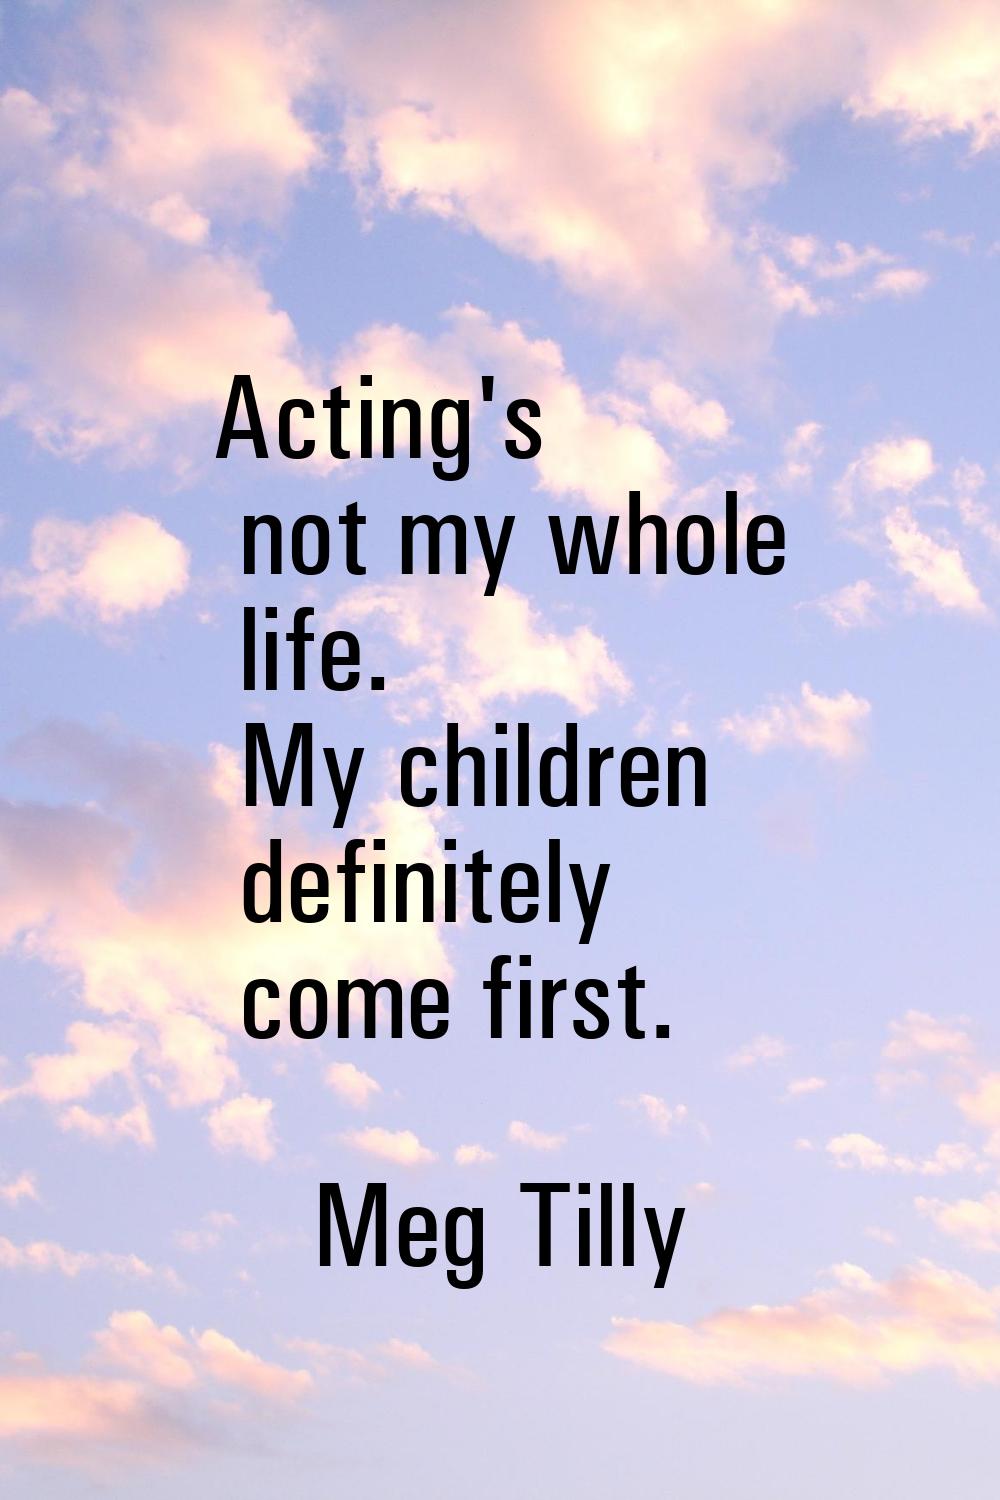 Acting's not my whole life. My children definitely come first.